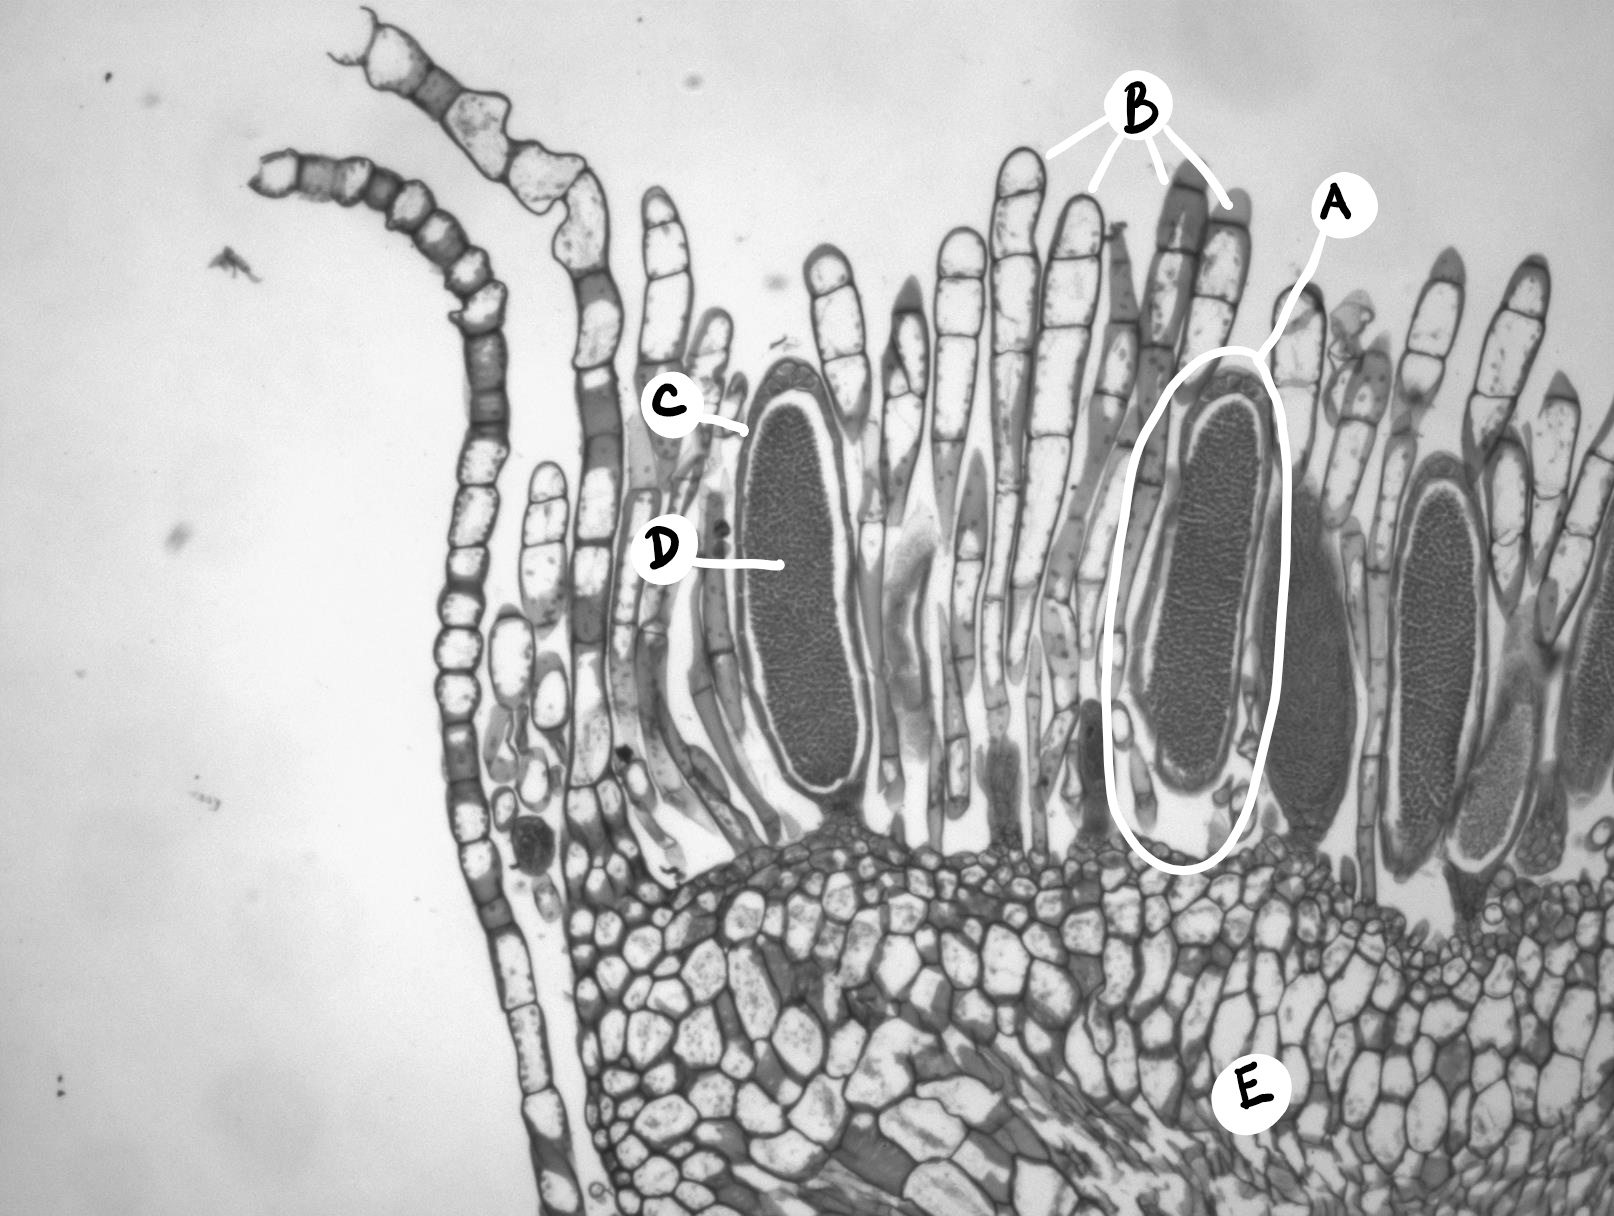 Labeled cross section of a Mnium antheridial head